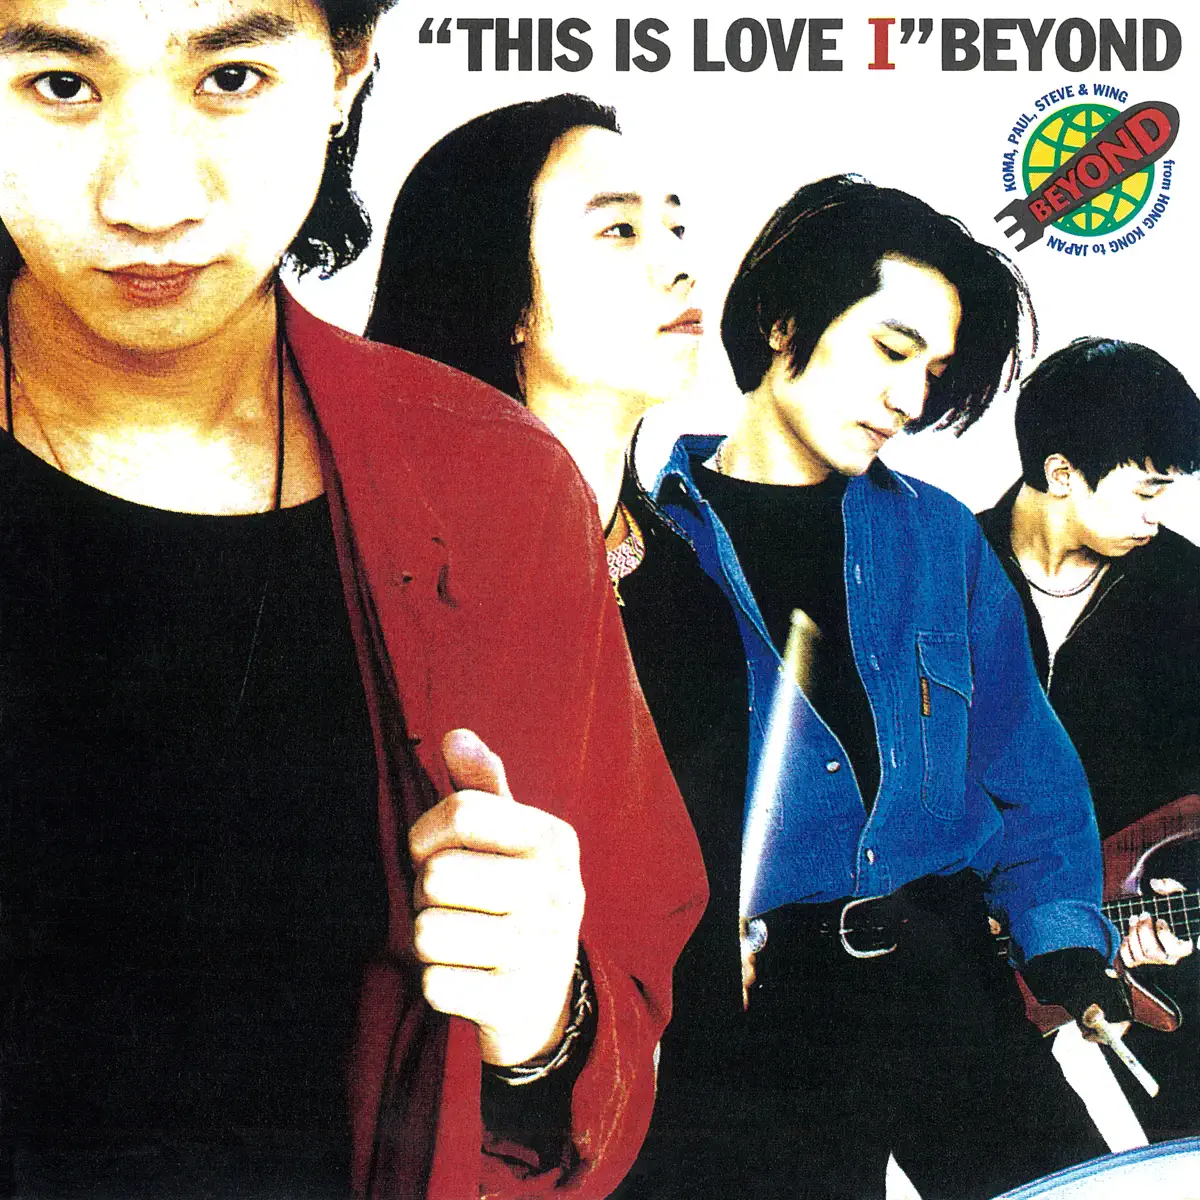 Beyond - THIS IS LOVE I (1993) [iTunes Plus AAC M4A]-新房子